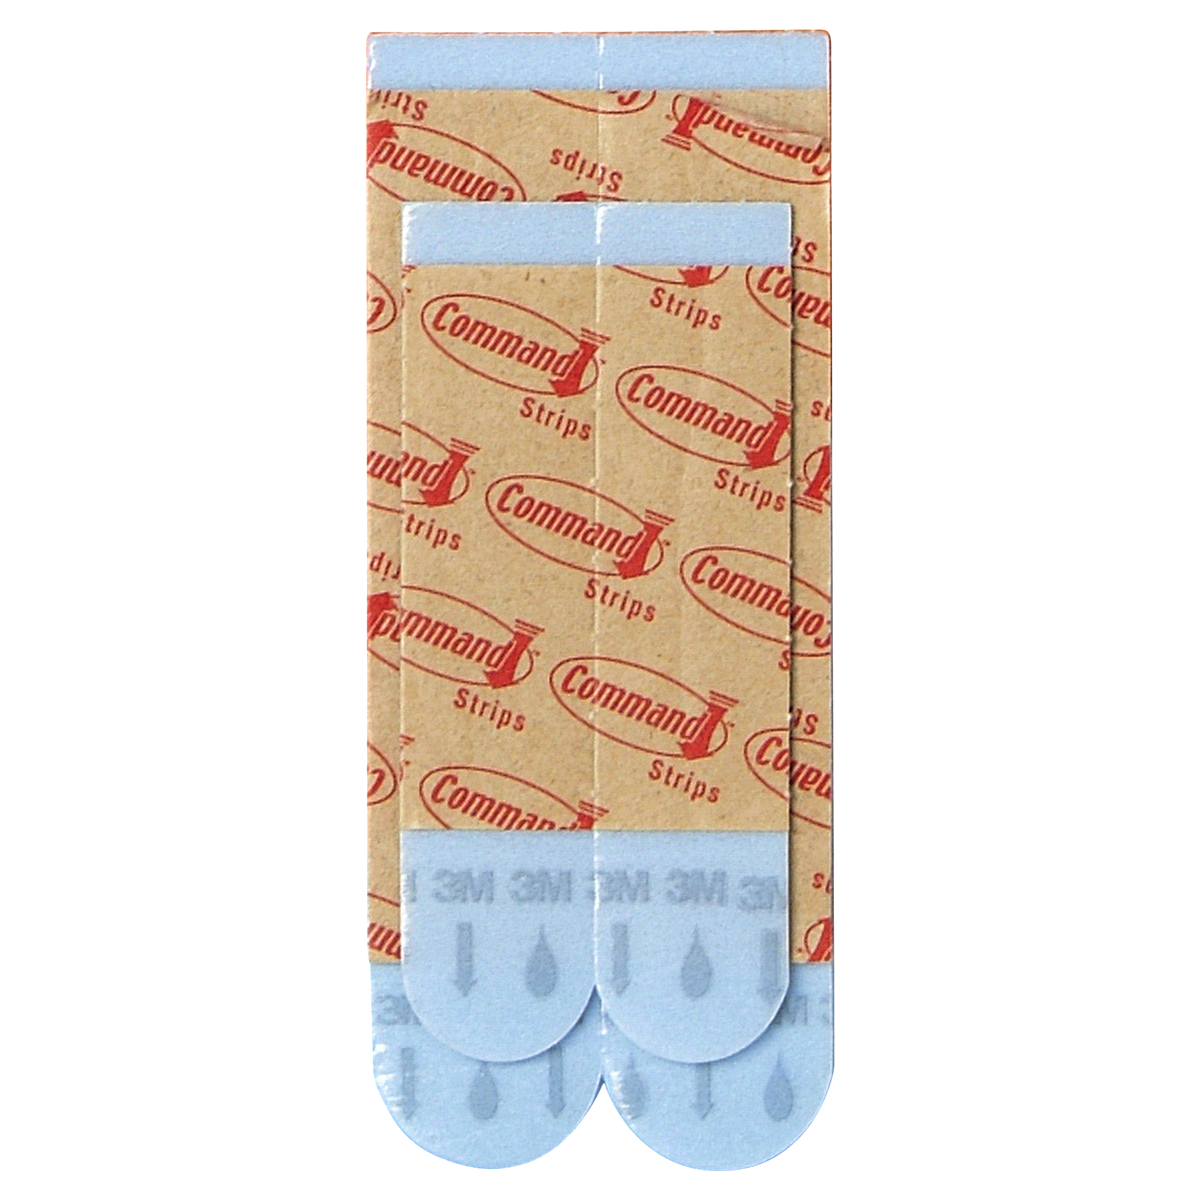 slide 2 of 18, Command Water Resistant Refill Strips (2 Medium/4 Large Strips), 1 ct